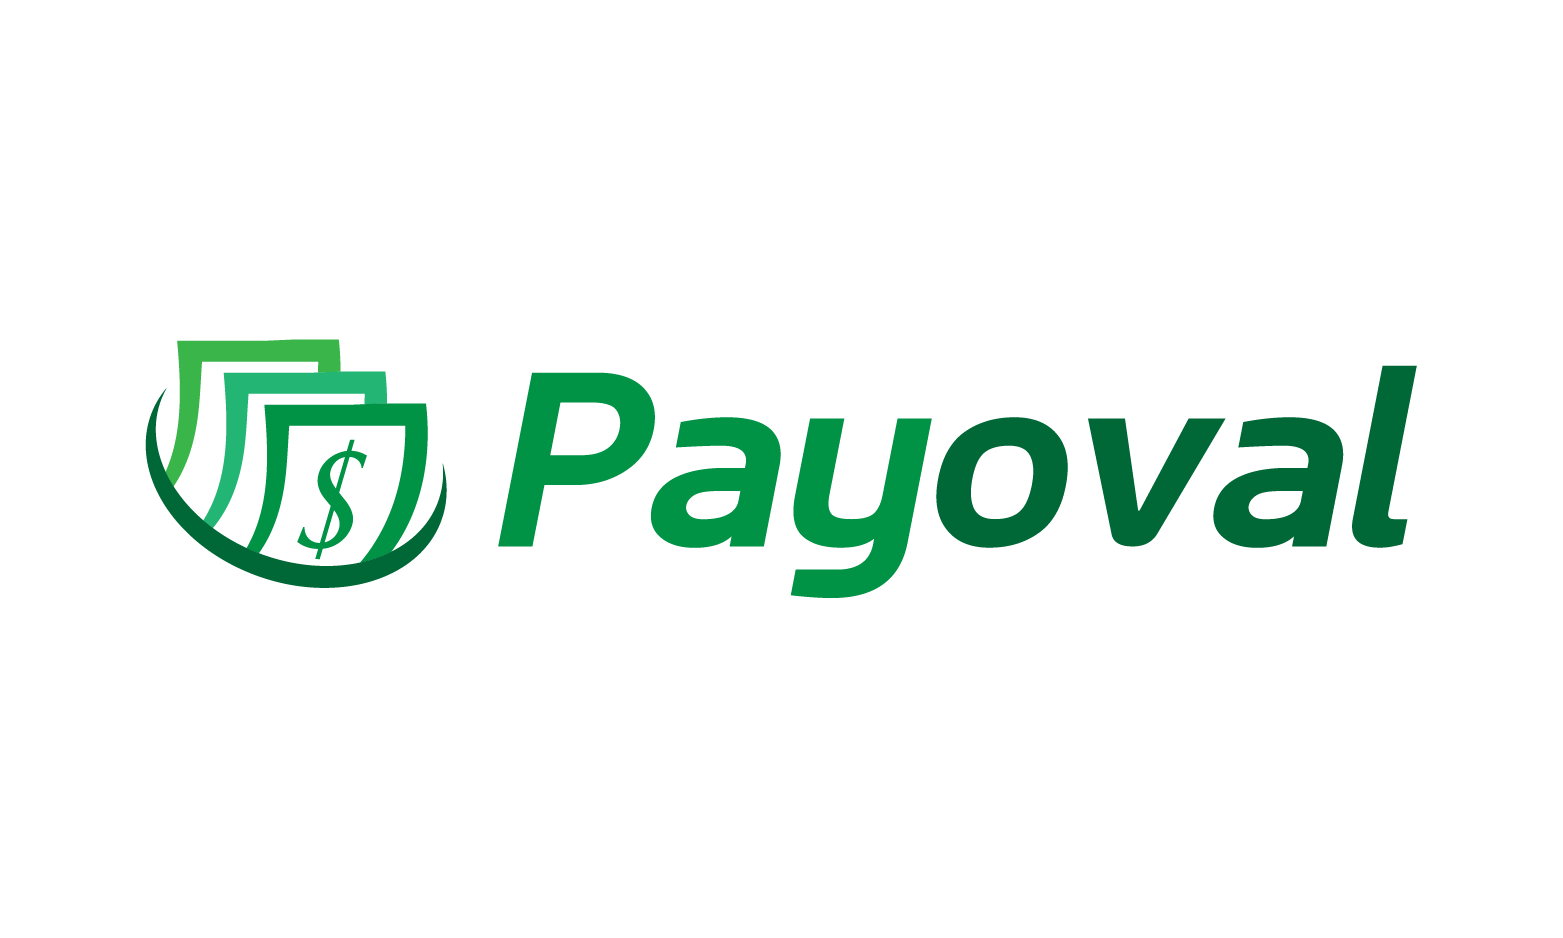 Payoval.com - Creative brandable domain for sale